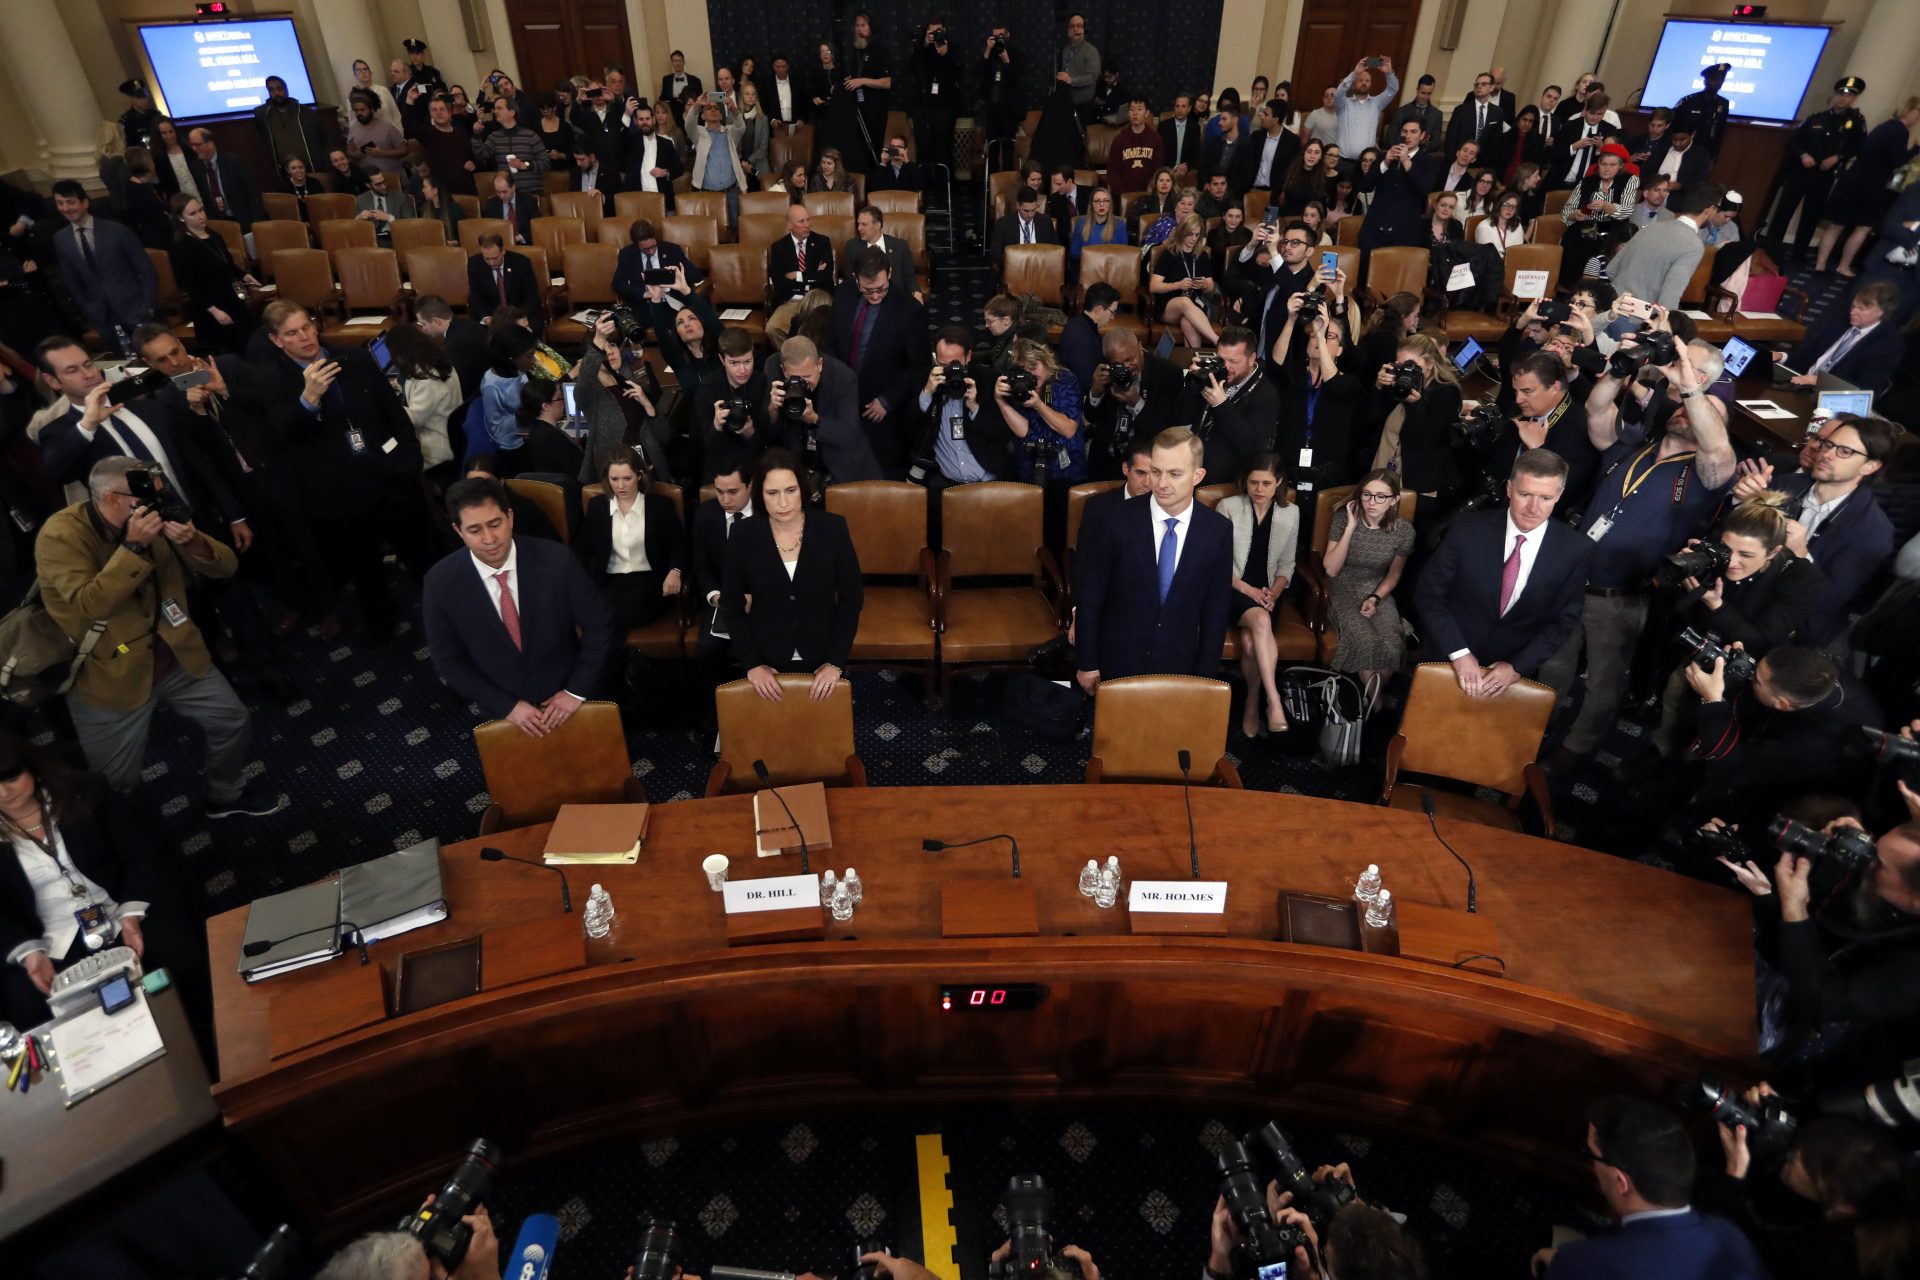 Former White House national security aide Fiona Hill, second from left, and David Holmes, a U.S. diplomat in Ukraine, stand behind their chairs as they arrive to testify before the House Intelligence Committee on Capitol Hill in Washington, Thursday, Nov. 21, 2019, during a public impeachment hearing of President Donald Trump's efforts to tie U.S. aid for Ukraine to investigations of his political opponents.